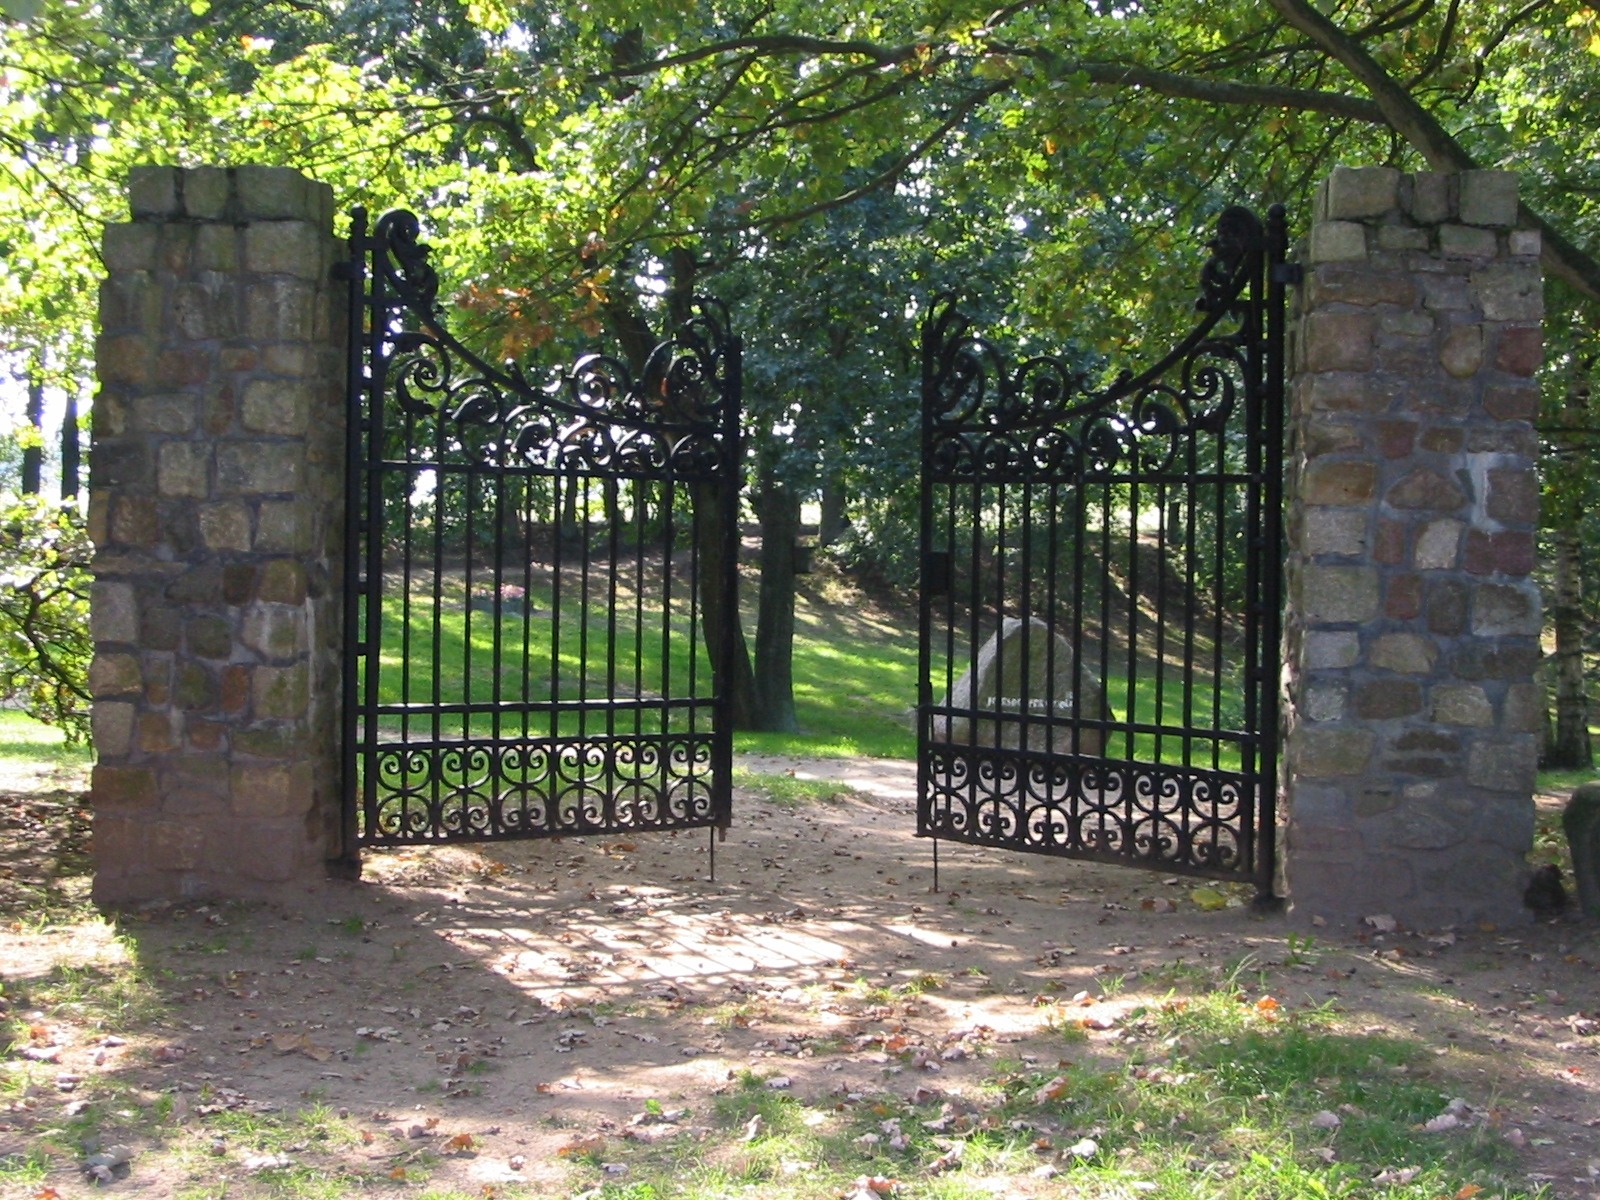 Gate installation near me: Do you want to know how to choose the right gate installation company? Read on to learn how to make the right choice.